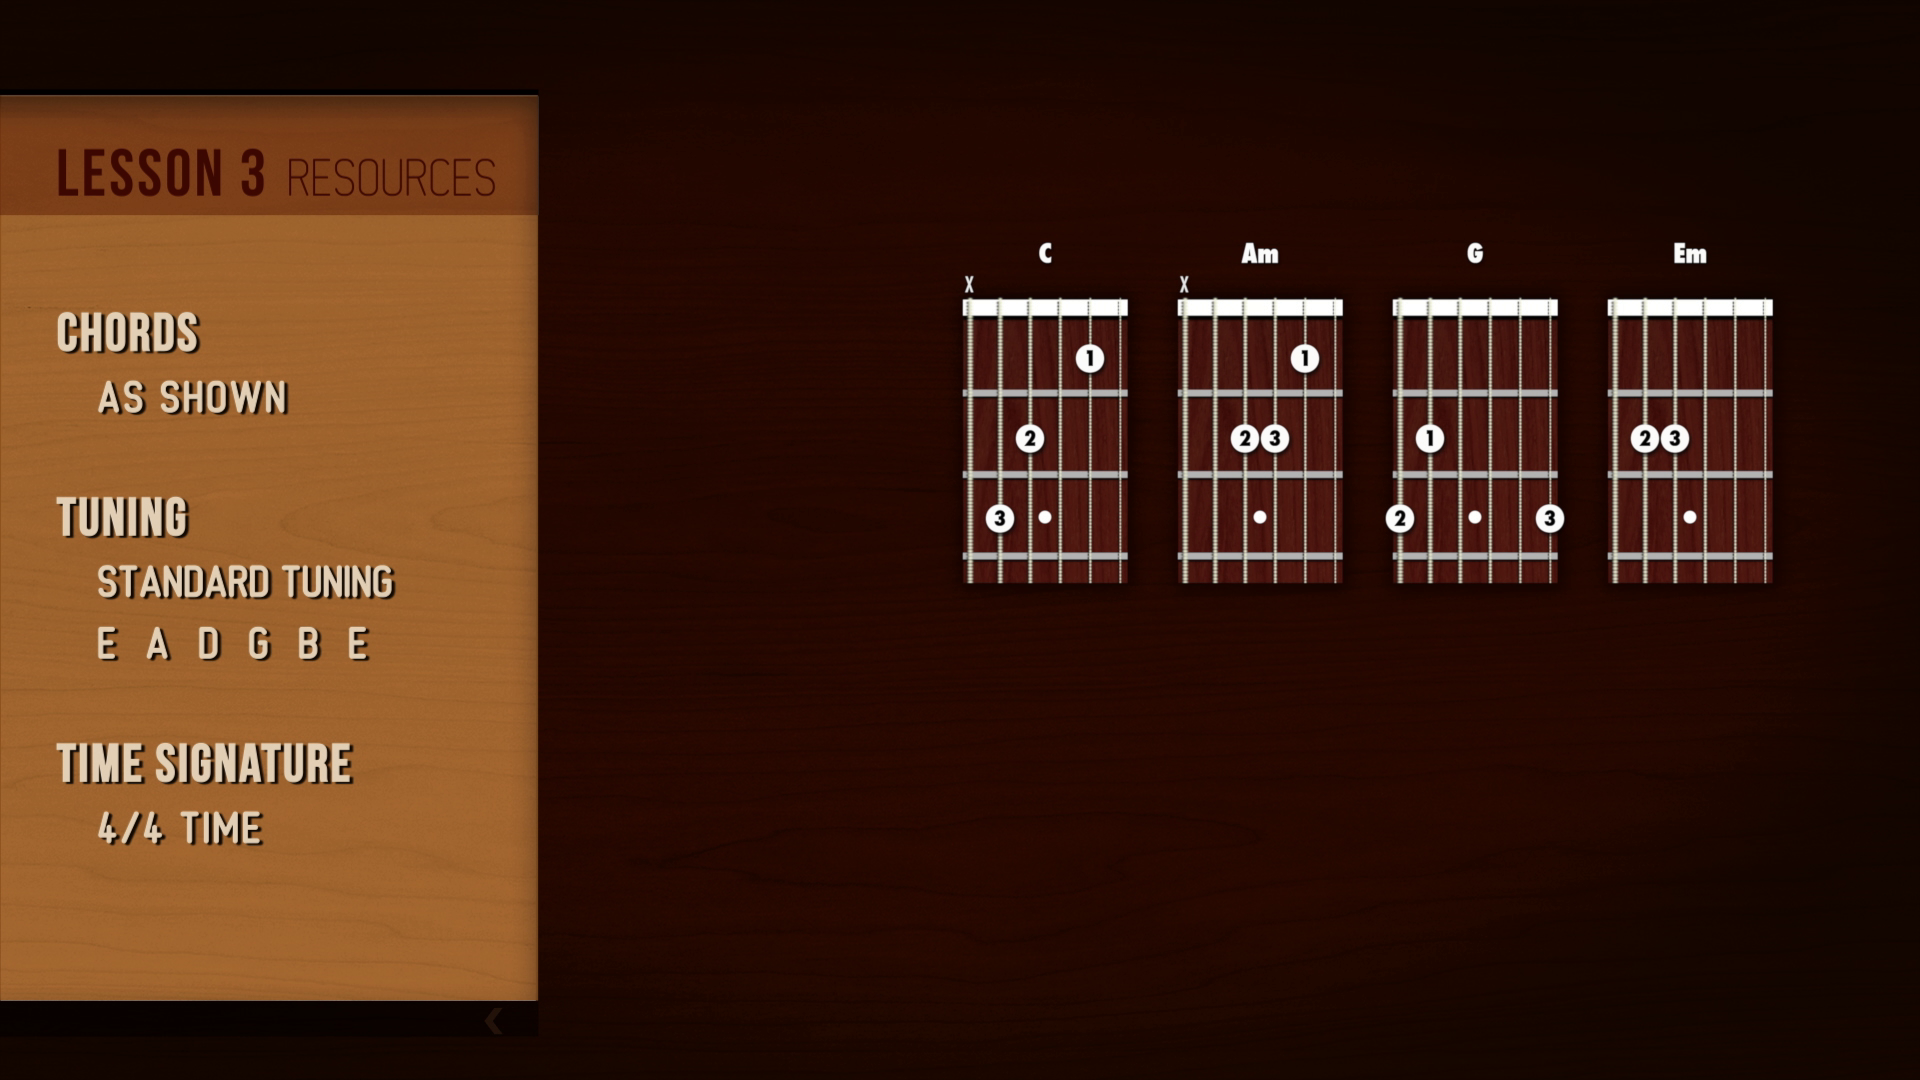 Taylor Carr Media, Training, Ray Bell FingerStyle Guitar Workshop Lesson 3, Portfolio Image, Lesson Resources